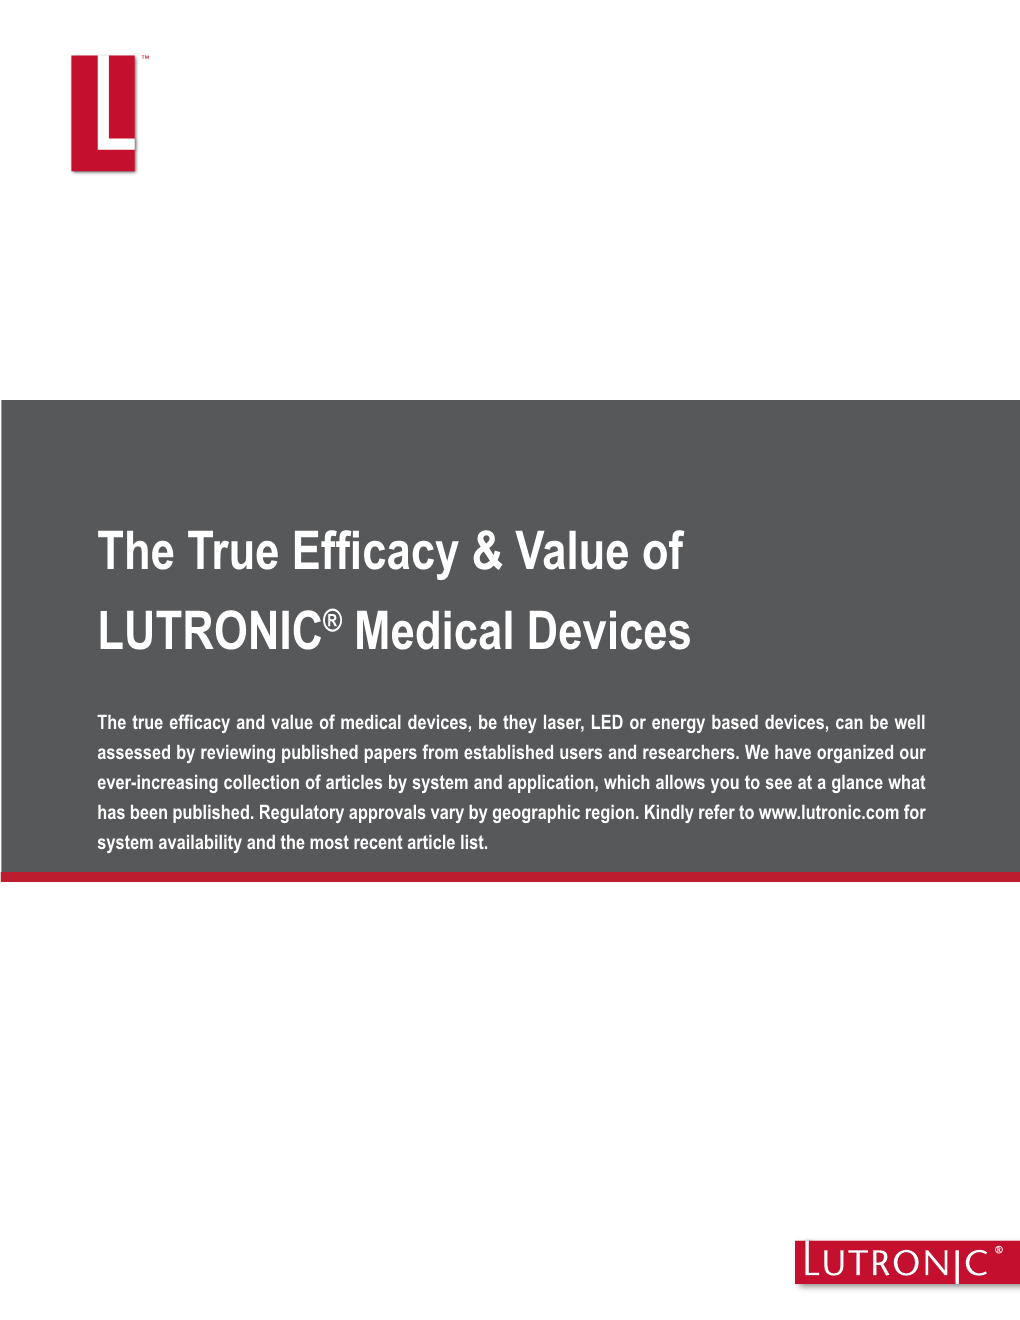 The True Efficacy & Value of LUTRONIC® Medical Devices